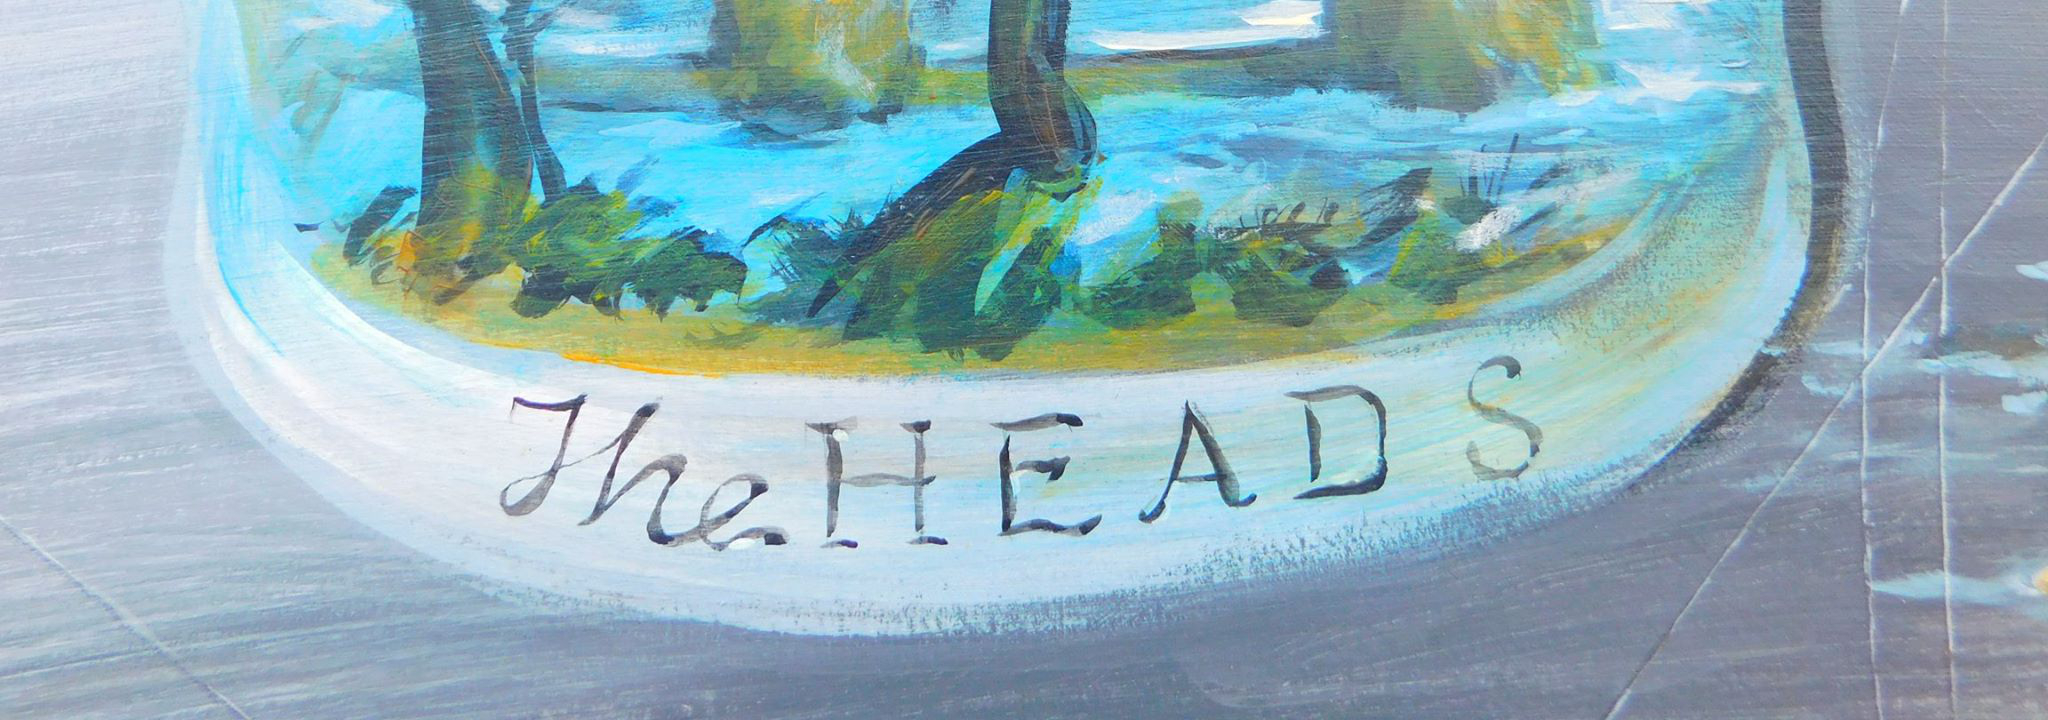 The Heads